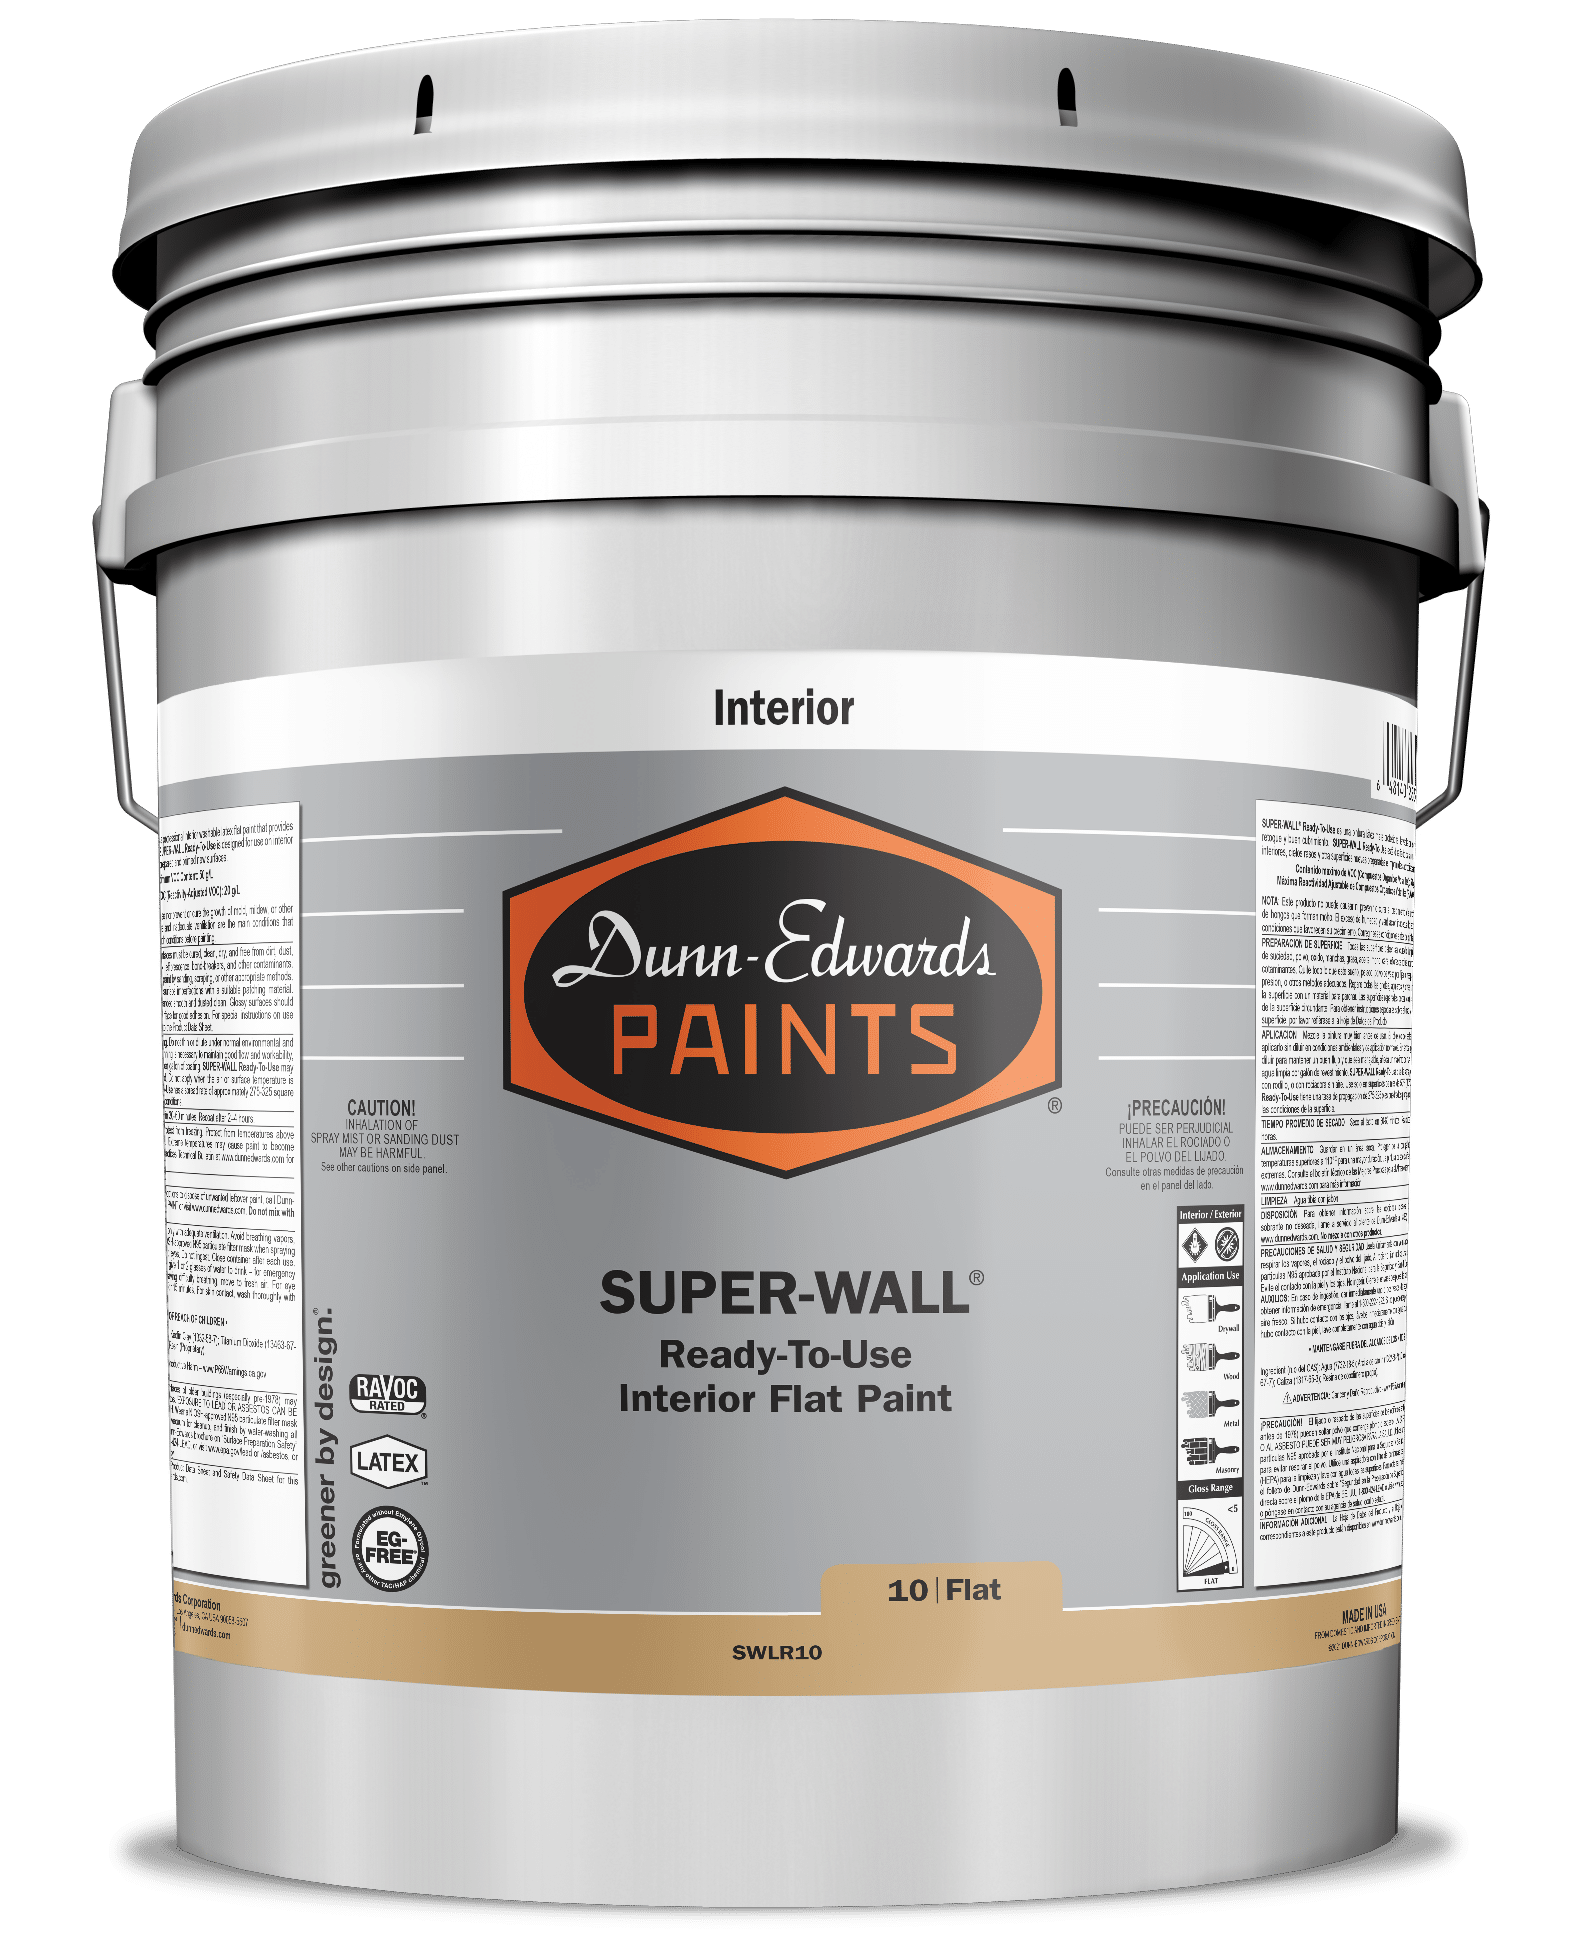 SUPER-WALL RTU (Ready-to-Use) Interior Flat Paint Can